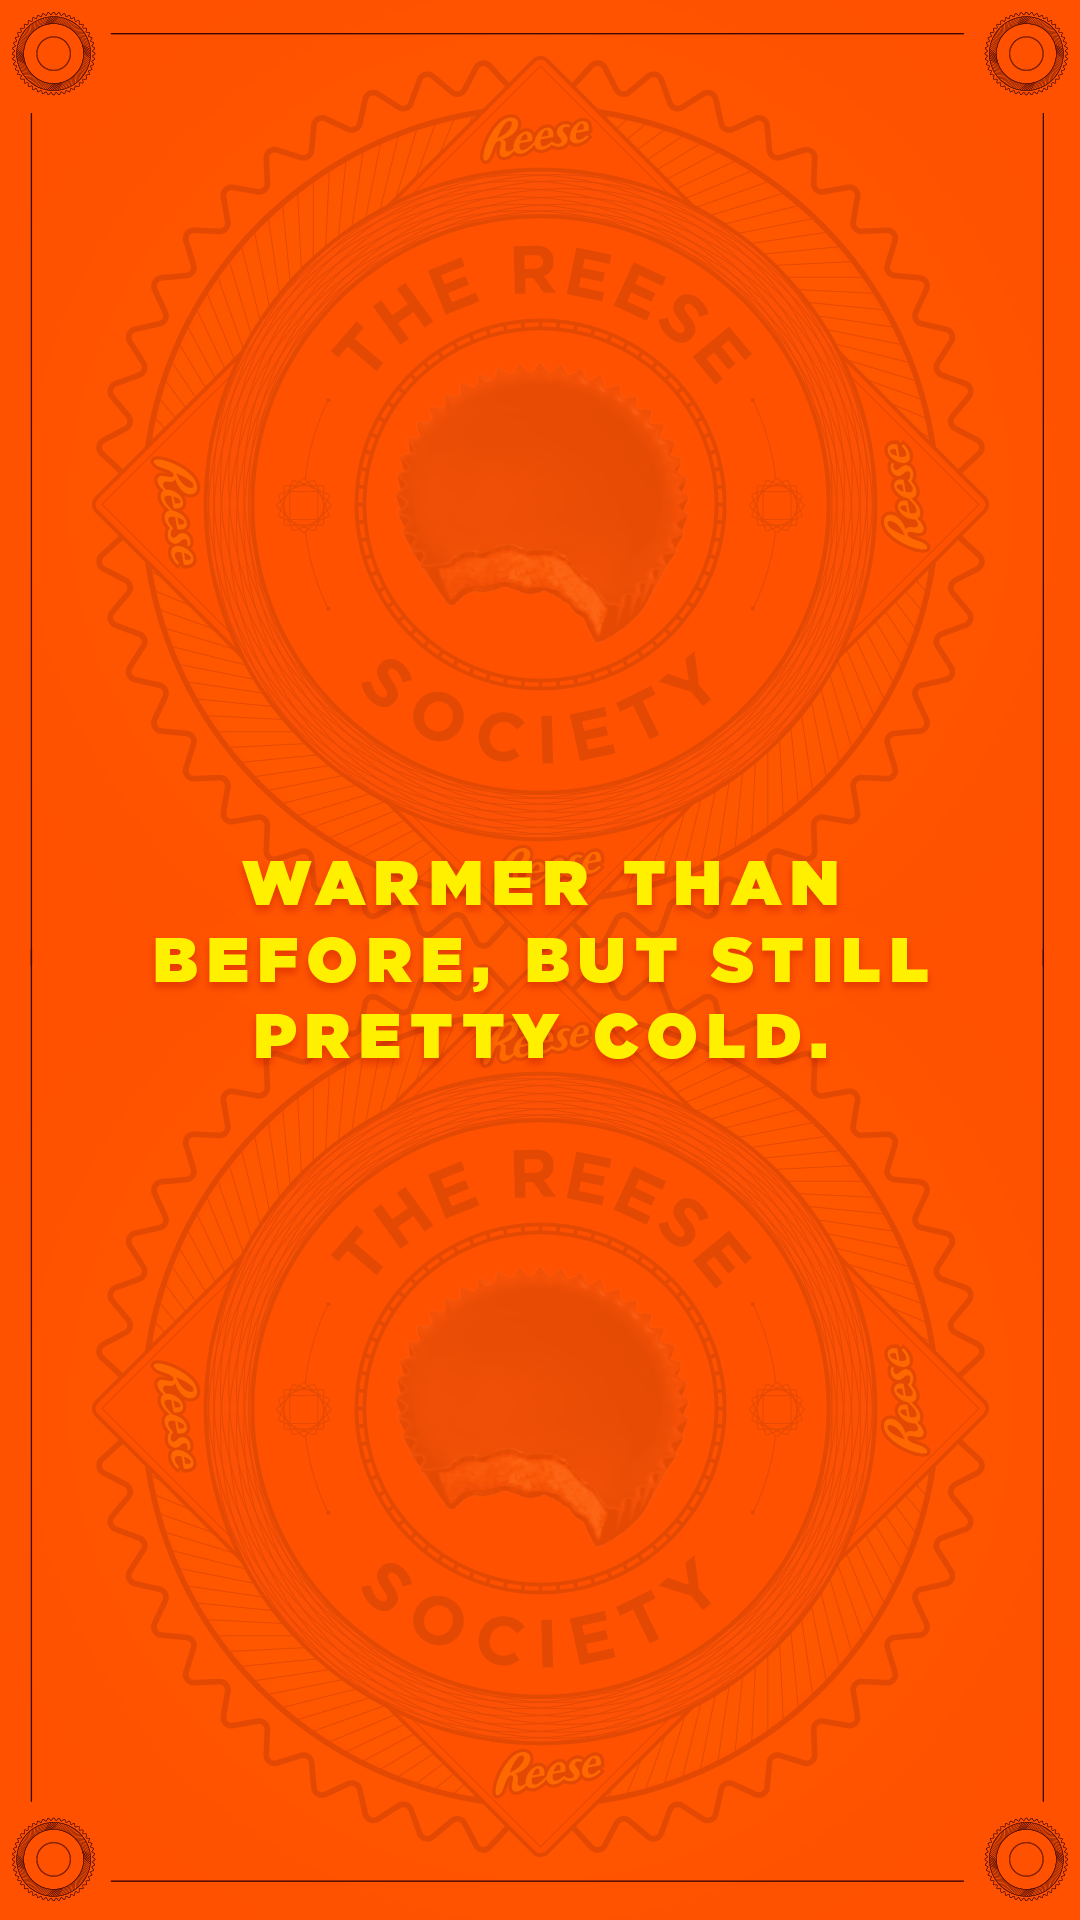 Reese-Society-IG_0054_Warmer-than-before,-but-still-pretty-cold.png